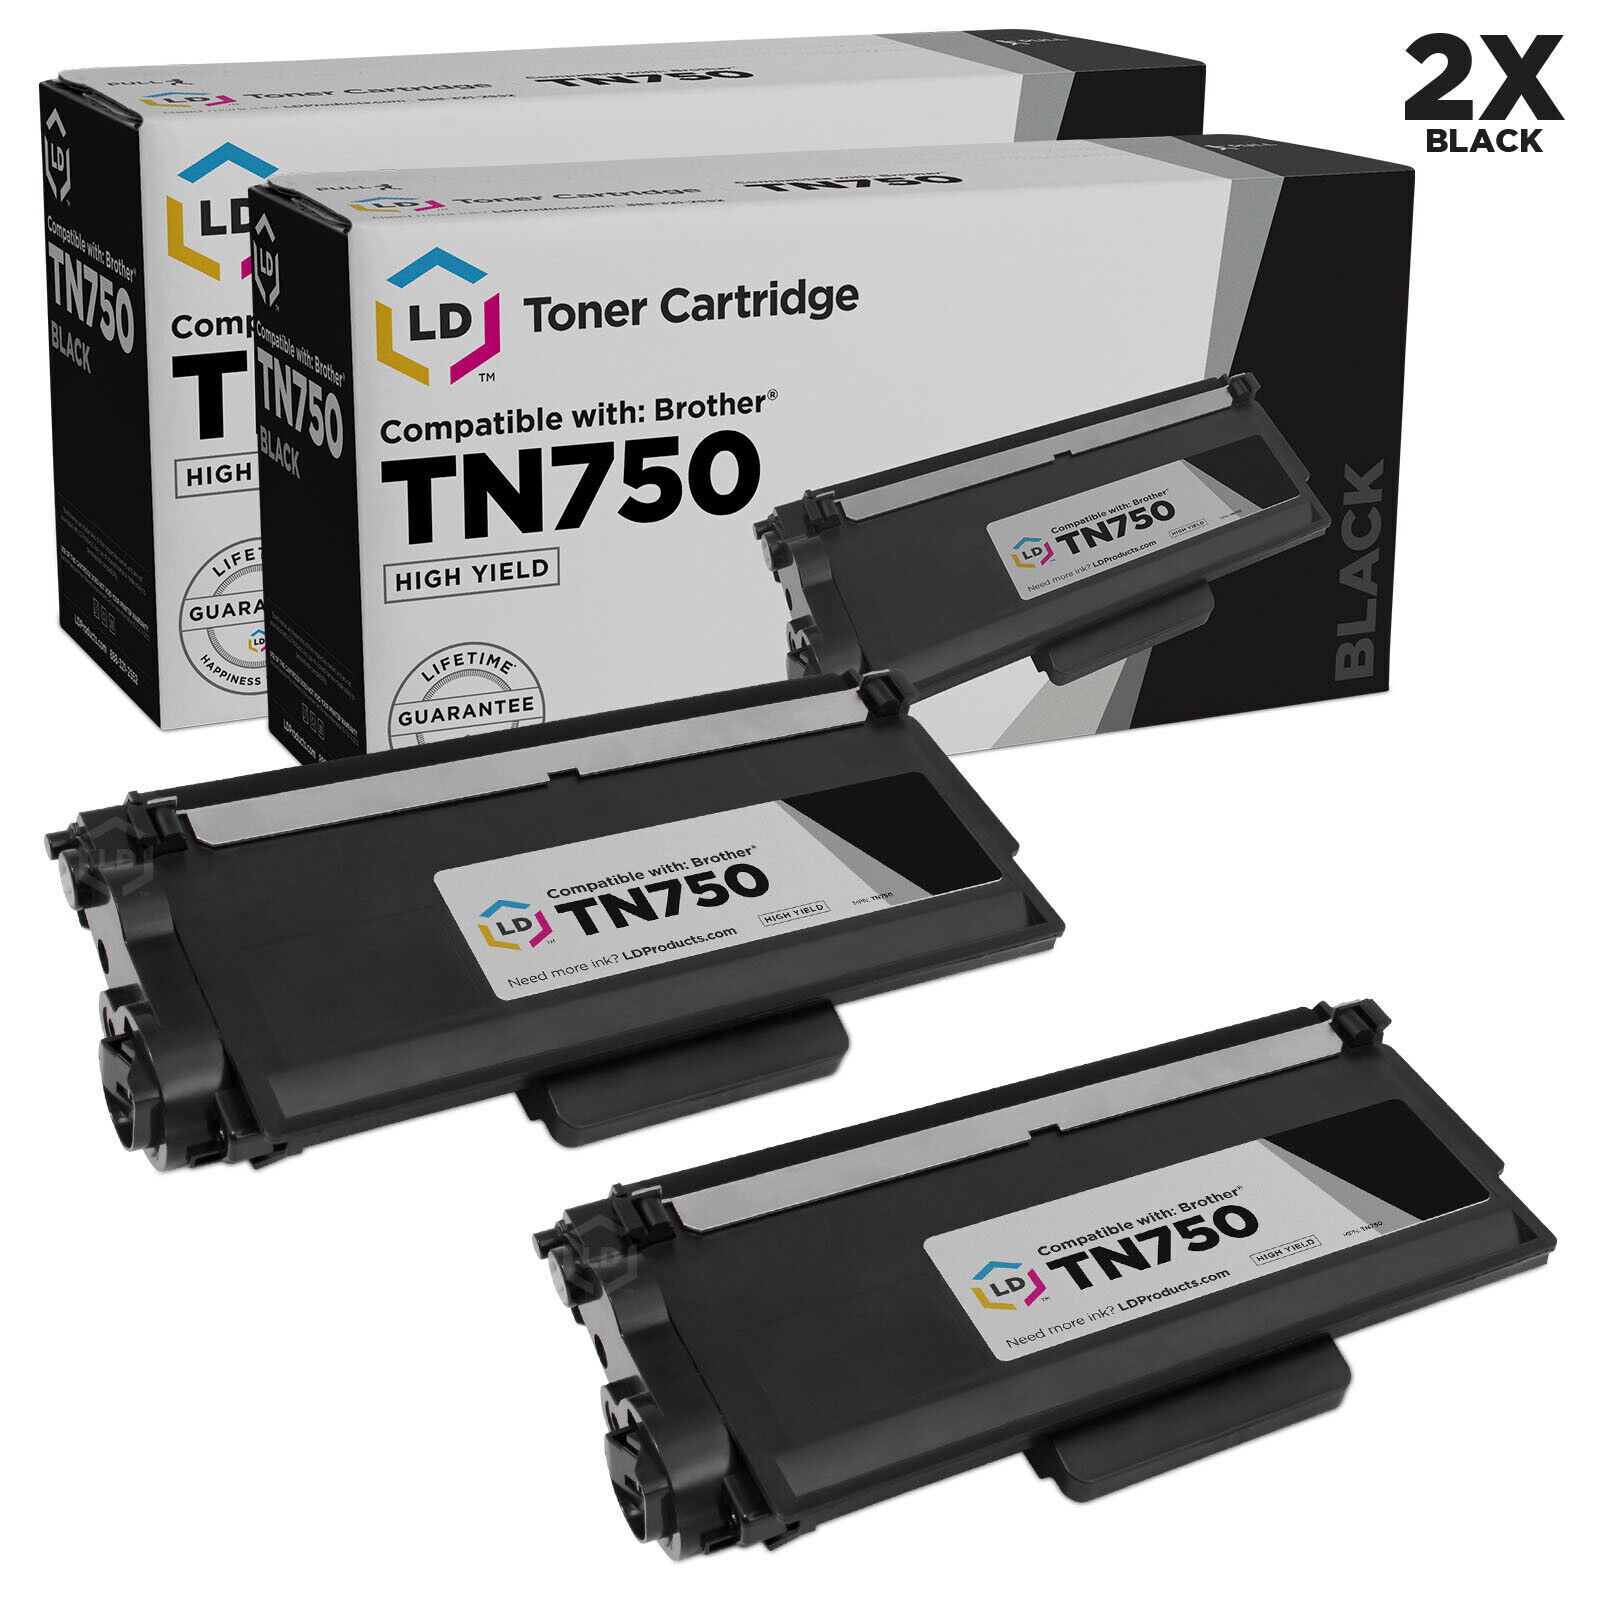 LD 2 Pack TN750 Black Laser HY Toner Cartridge for Brother MFC-8810DW DCP-8155DN